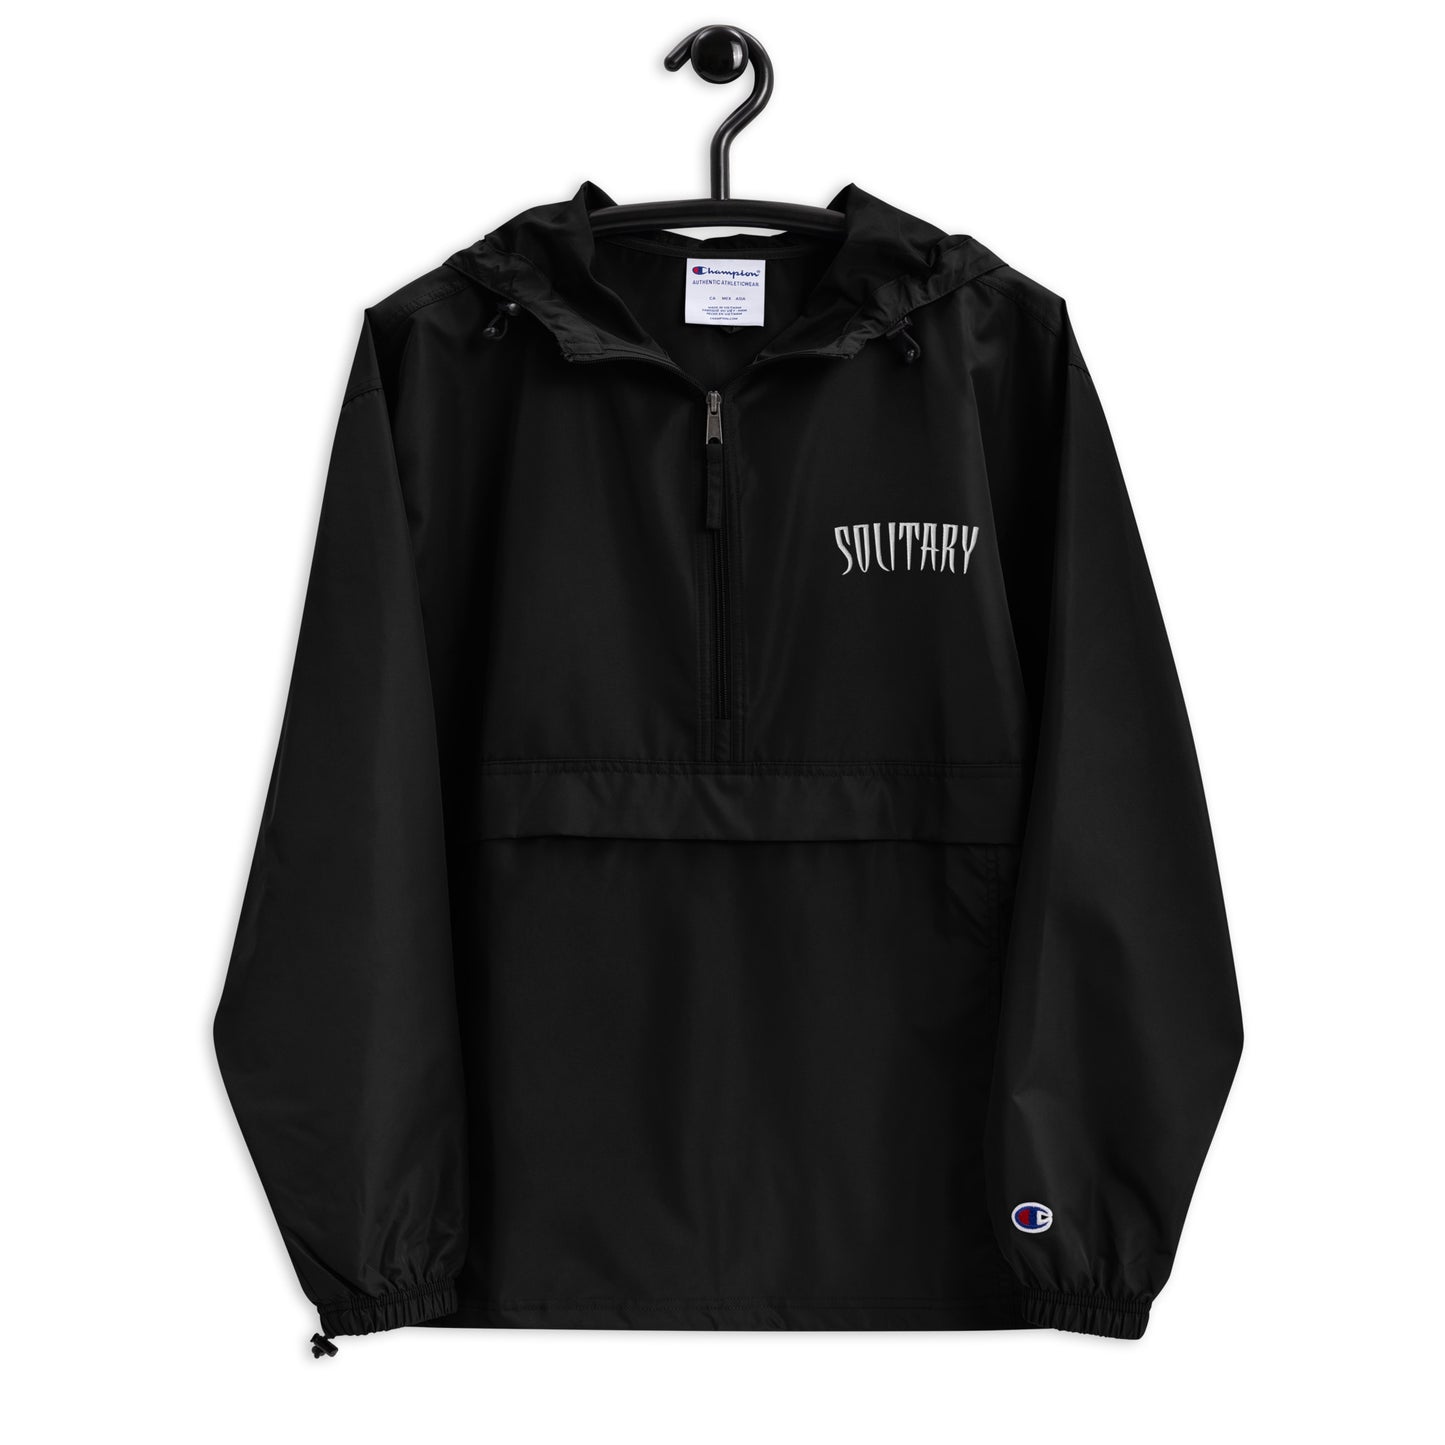 Fangs Embroidered Solitary x Champion Windbreaker